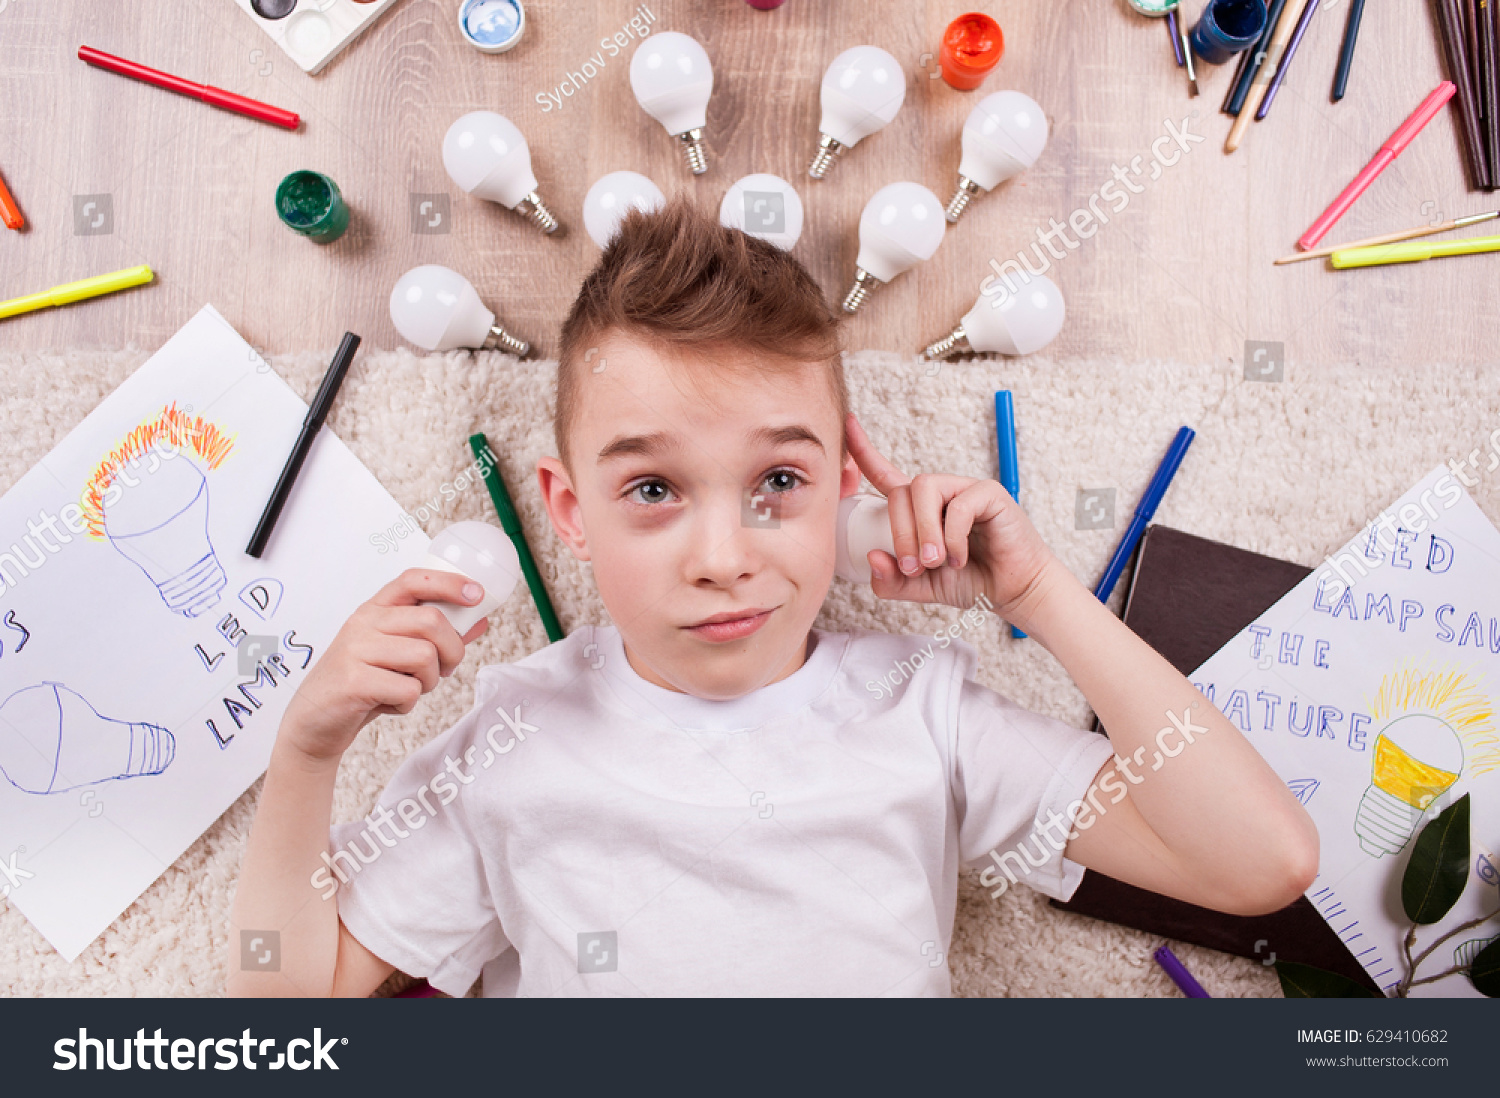 A little boy lies among the markers and drawings of LED bulbs #629410682